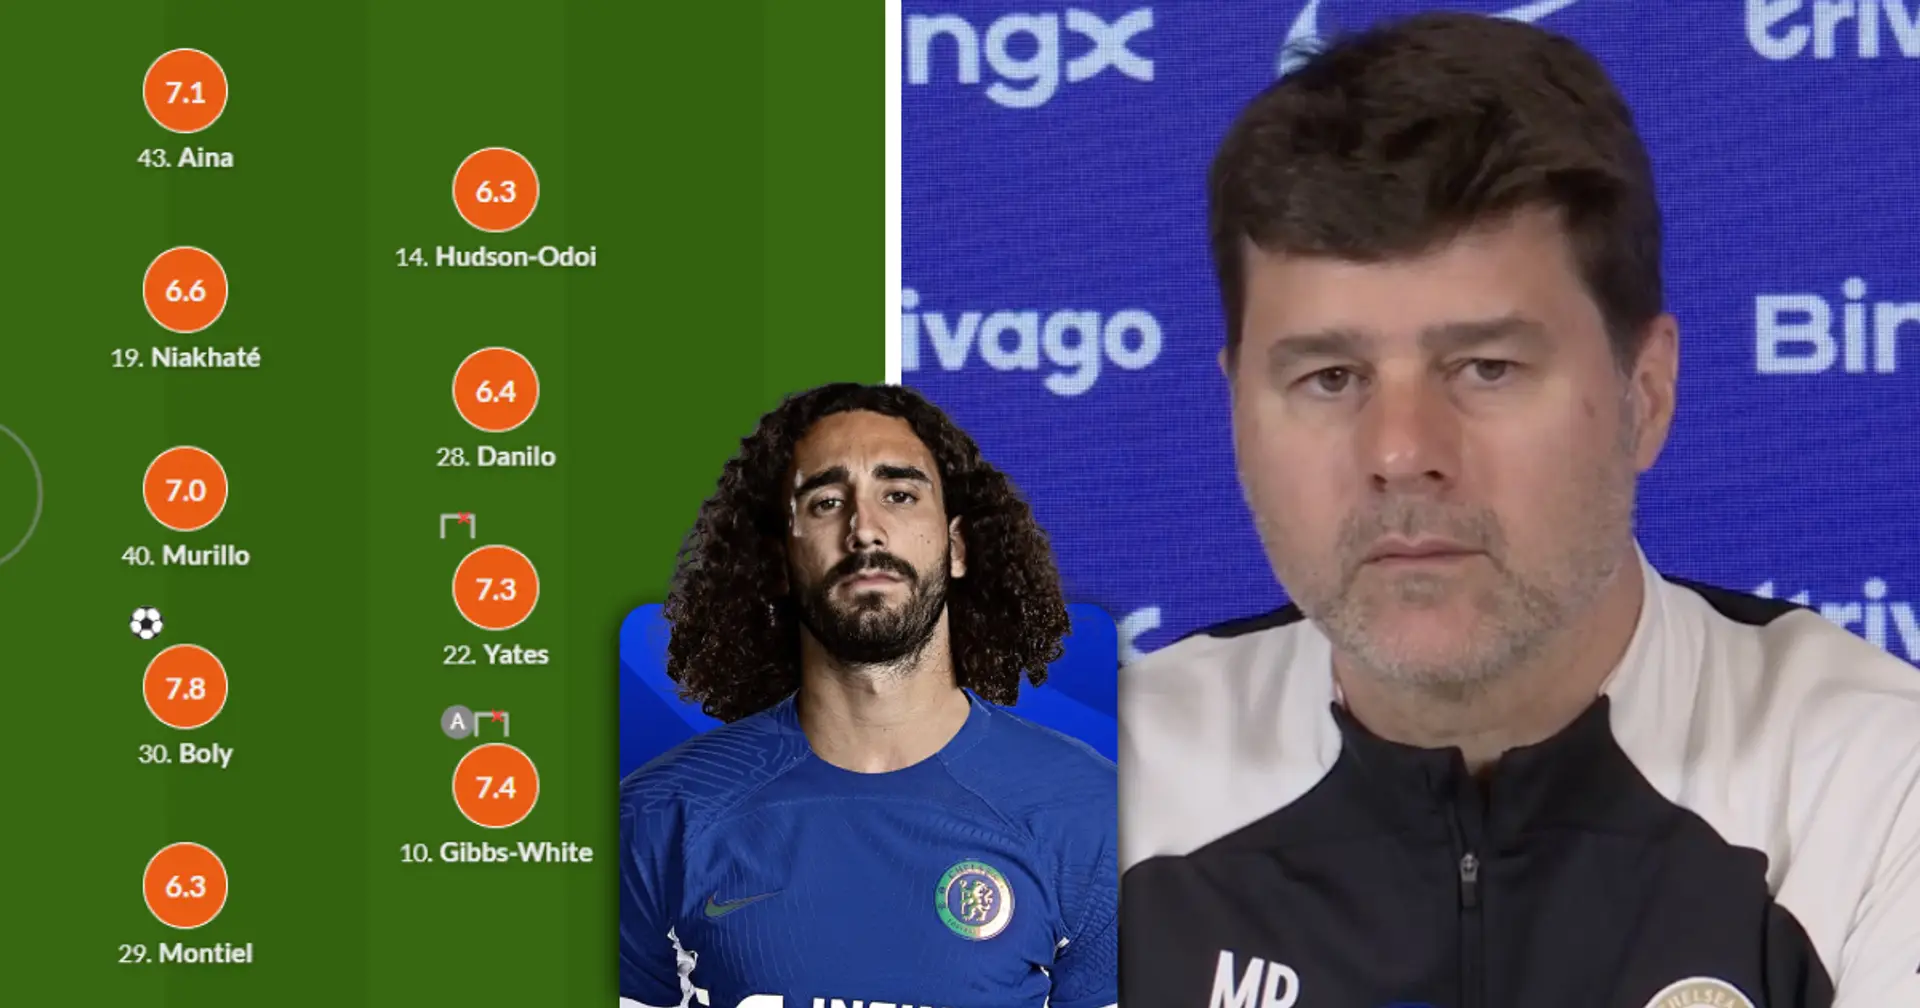 Why did Chelsea look so bad in the first half against Forest? The problem could be with Cucurella's role